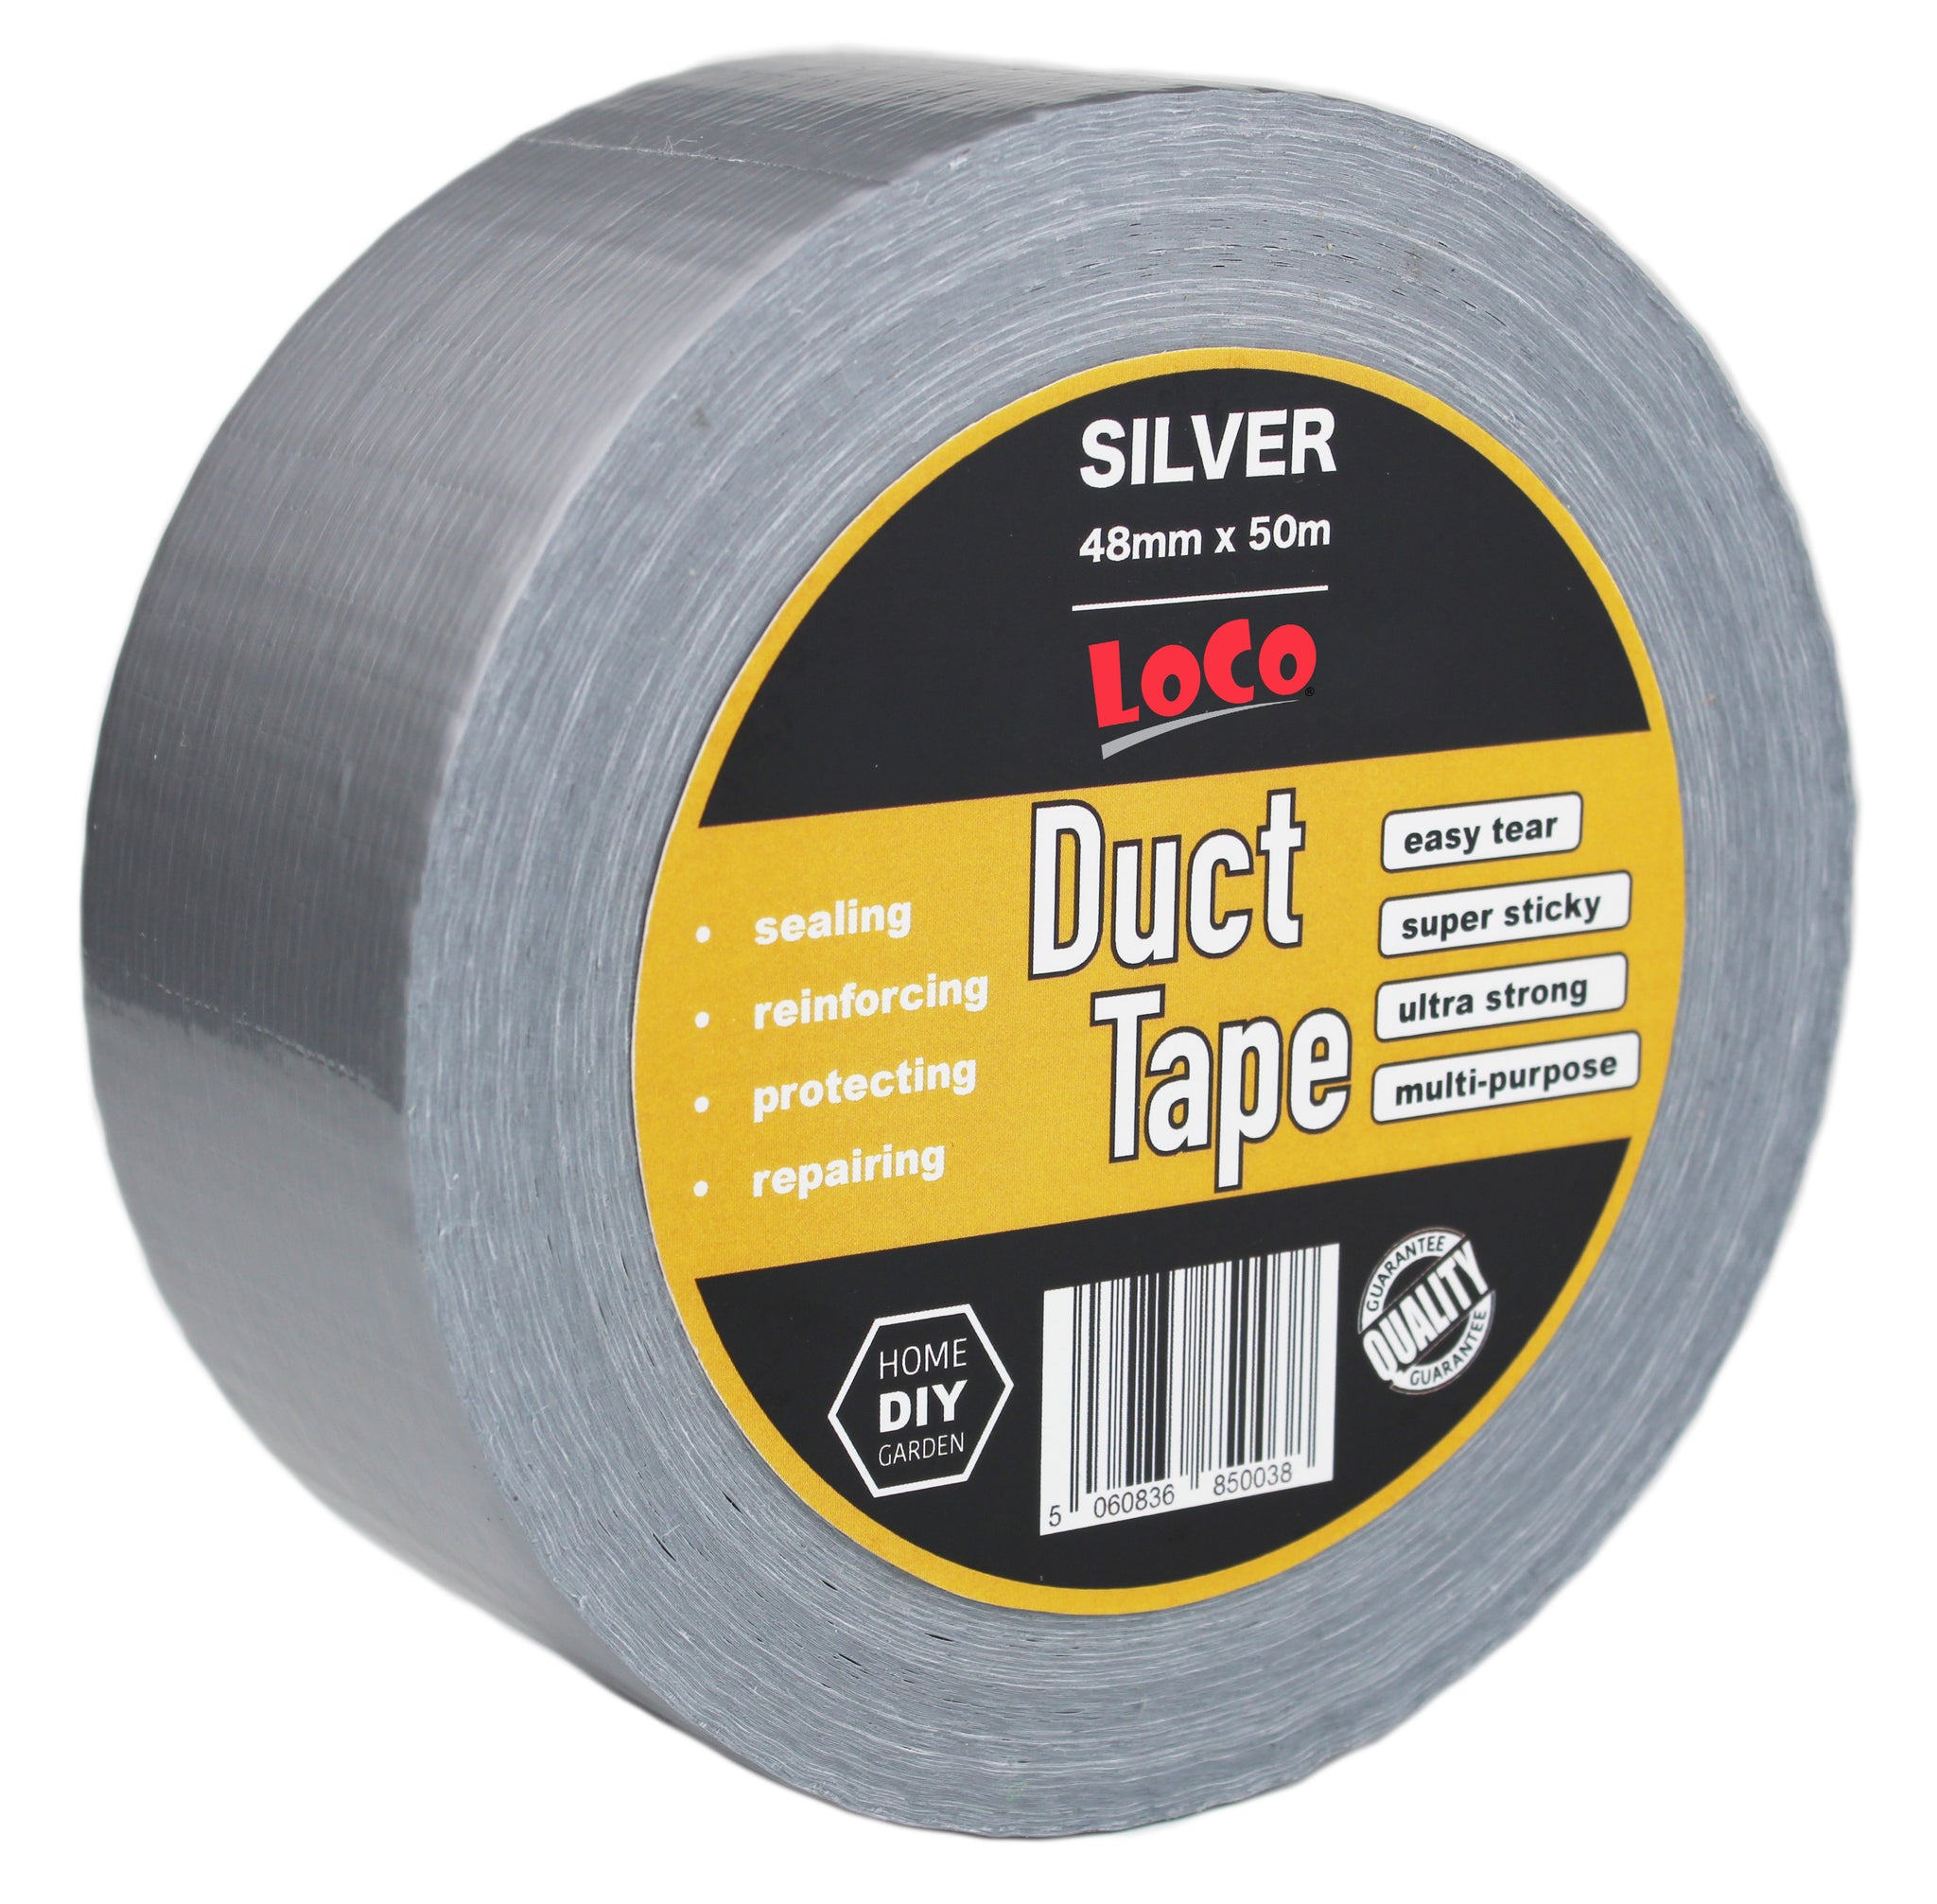 DUCT TAPE SILVER 48mm x 50m - Loco Tape